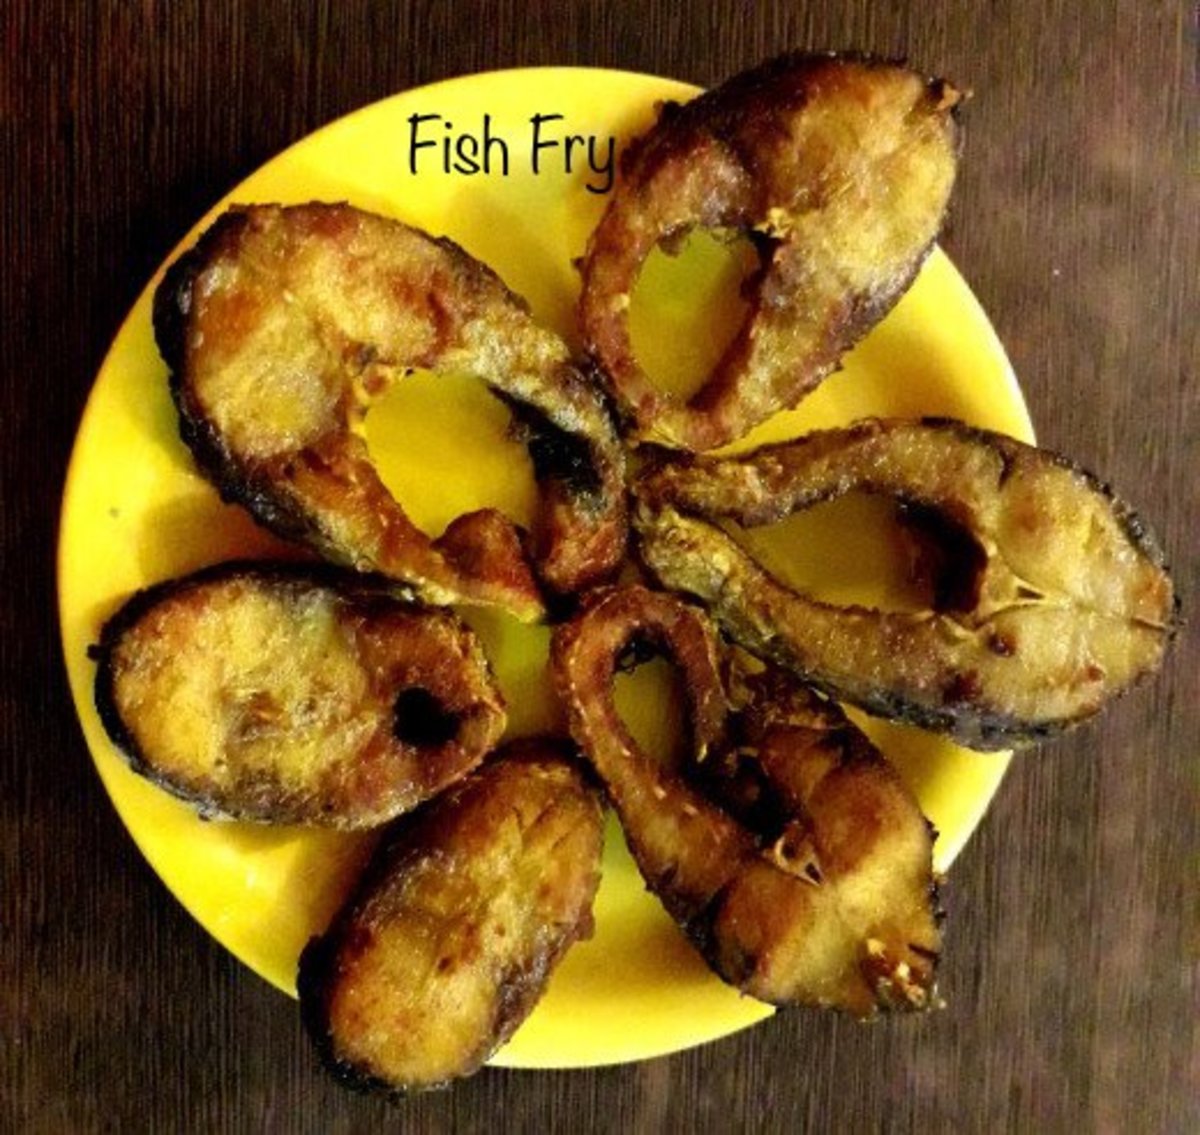 2 Rohu Fish Recipes From India: Mustard Curry and Fried Snack